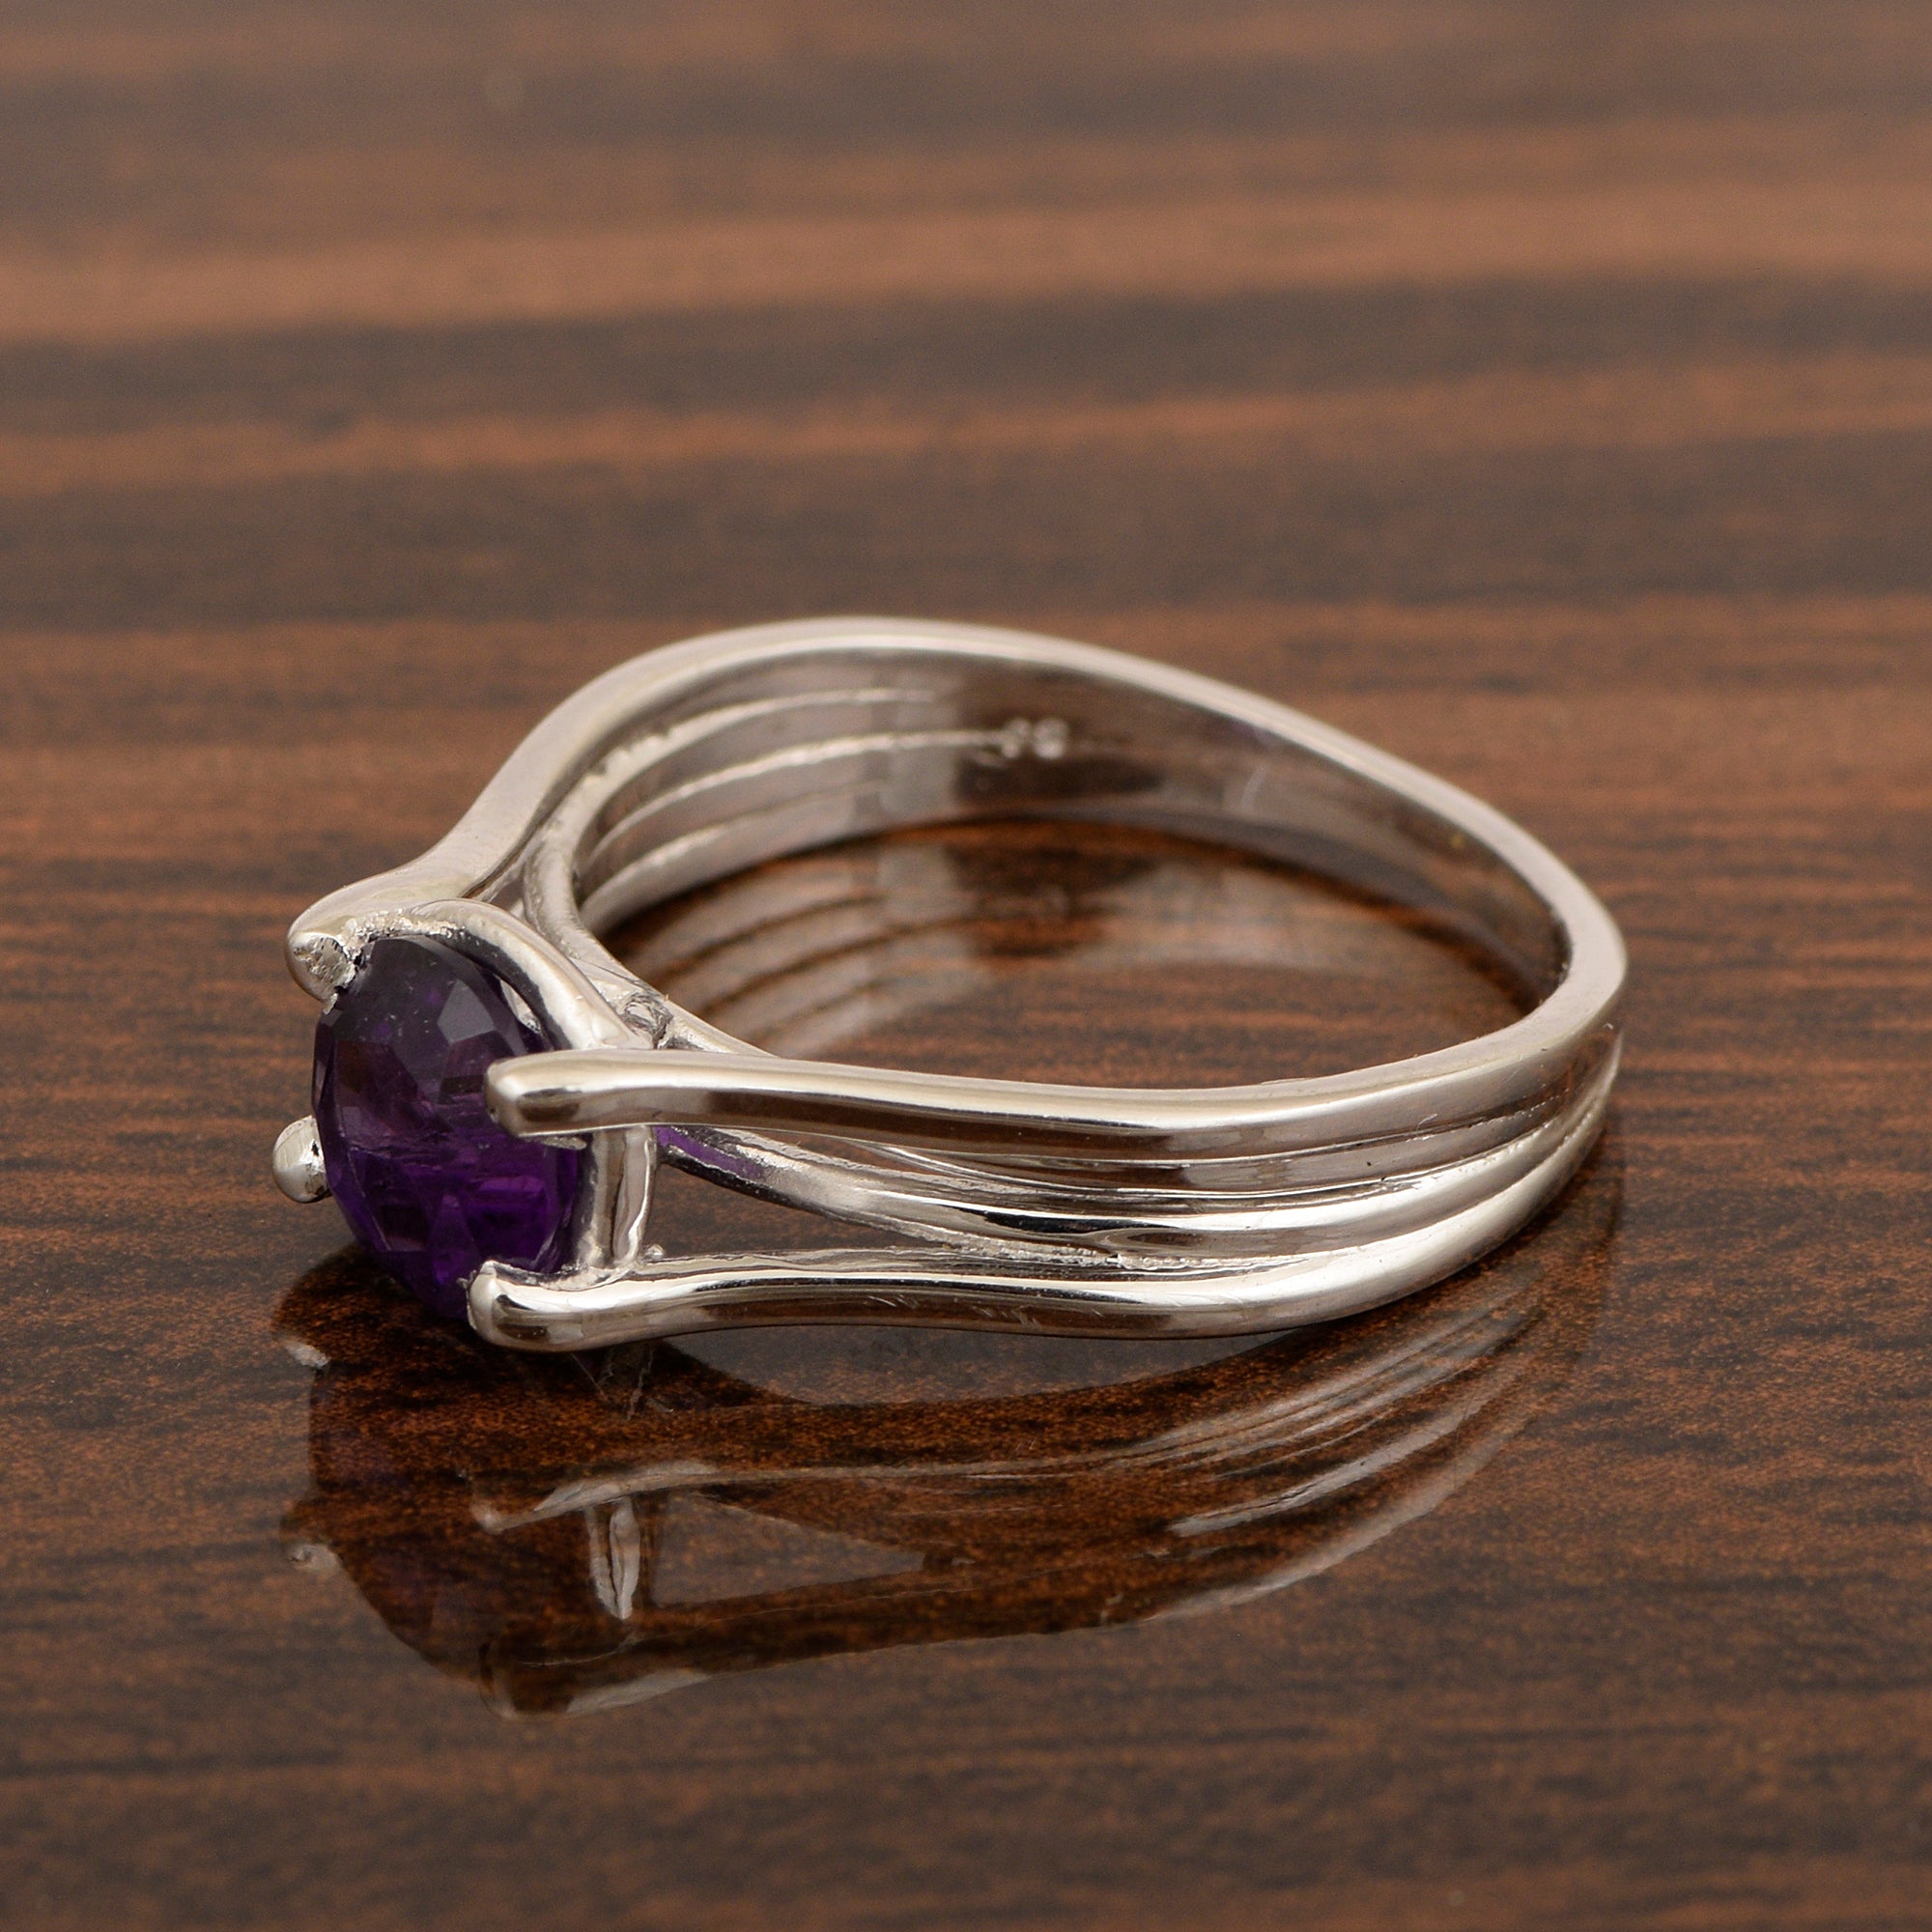 23.0 Carat Amethyst sterling Silver Ring - Gorgeous